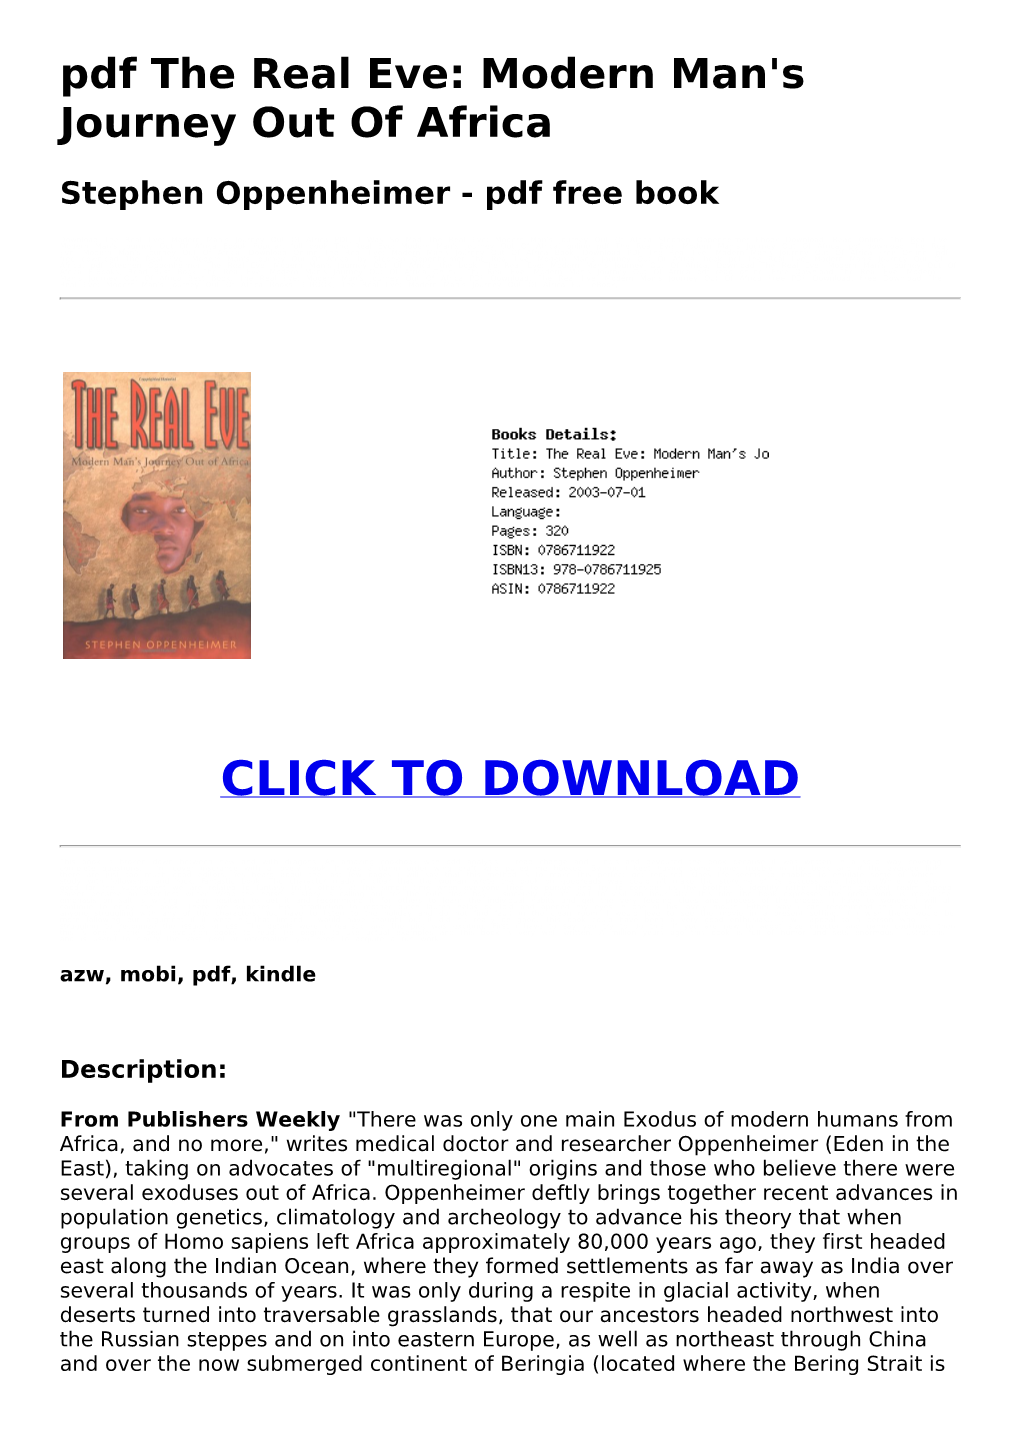 Pdf the Real Eve: Modern Man's Journey out of Africa